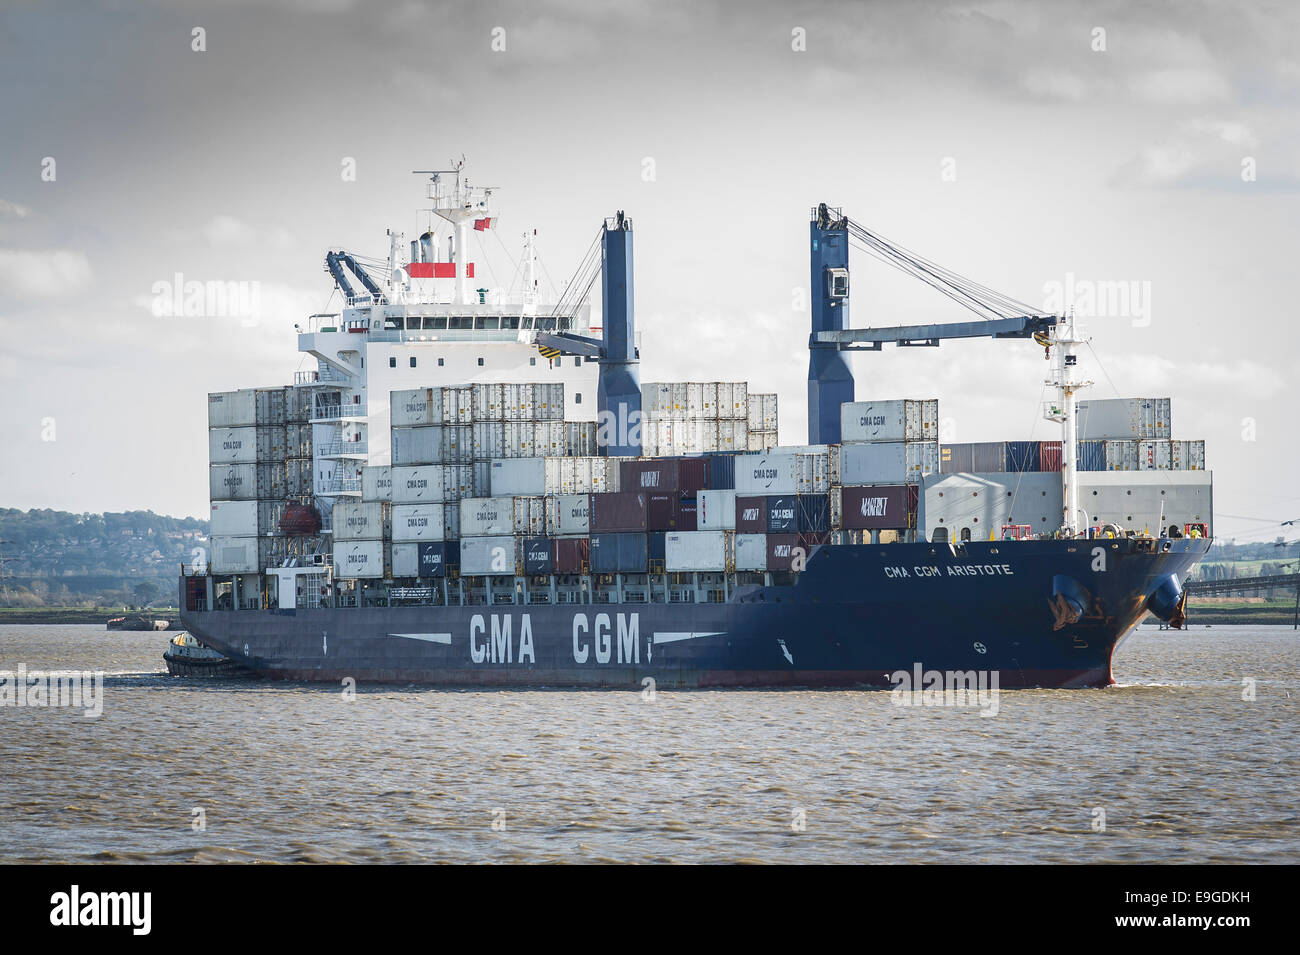 Thames, Tilbury, Essex, UK.  27 October 2014.  The  fully laden container ship CMA CGM Aristote steams upriver on the River Thames.  Photo: Gordon Scammell/Alamy Live News Stock Photo